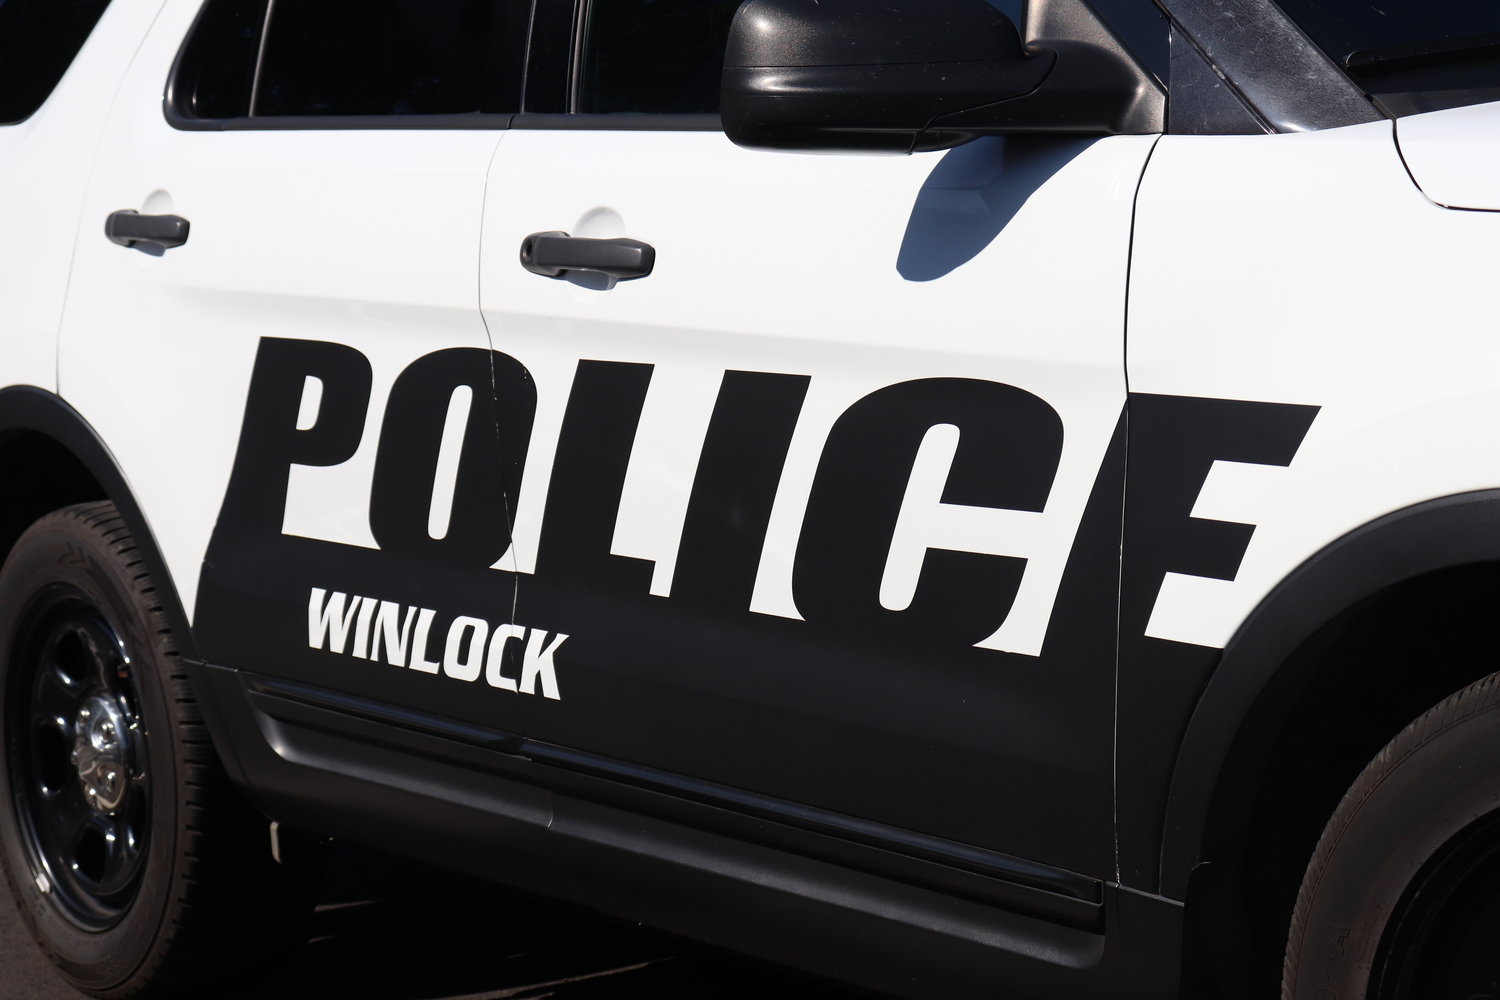 A Winlock police patrol vehicle is pictured Thursday. The Winlock Police Department will provide temporary service for Toledo.